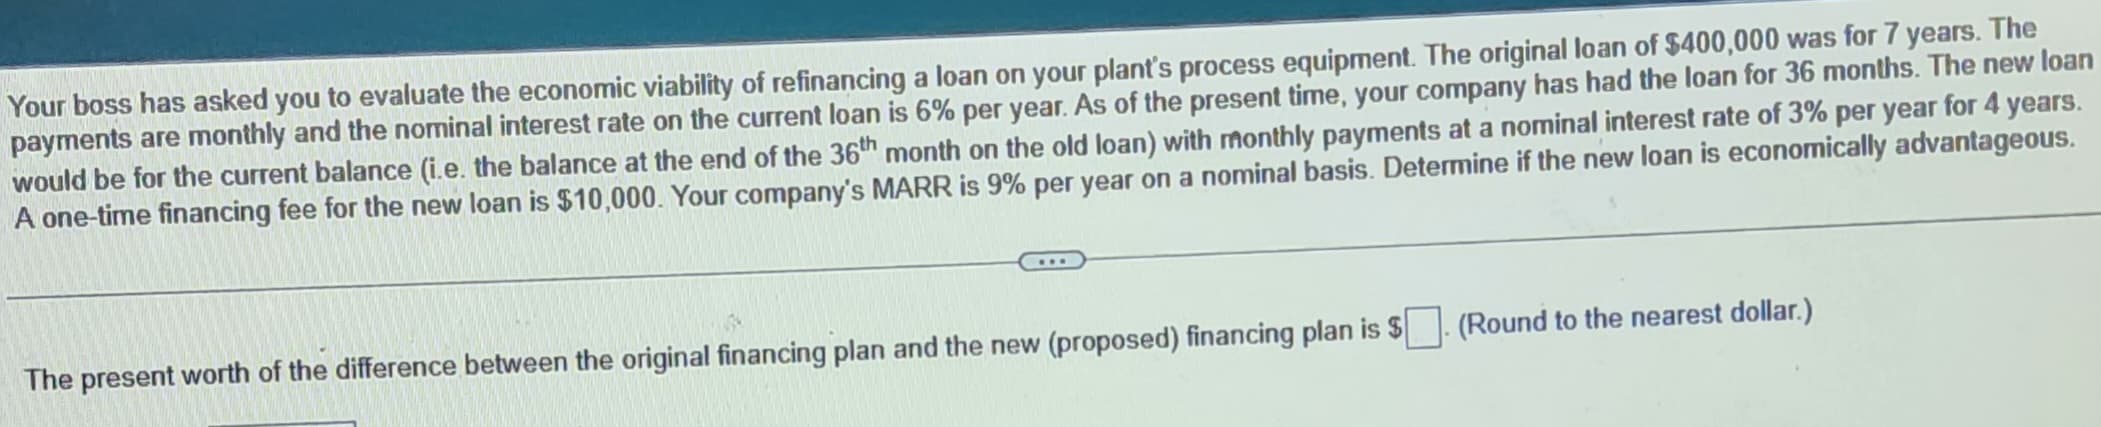 Your boss has asked you to evaluate the economic viability of refinancing a loan on your plant's process equipment. The original loan of $400,000 was for 7 years. The
payments are monthly and the nominal interest rate on the current loan is 6% per year. As of the present time, your company has had the loan for 36 months. The new loan
would be for the current balance (i.e. the balance at the end of the 36th month on the old loan) with monthly payments at a nominal interest rate of 3% per year for 4 years.
A one-time financing fee for the new loan is $10,000. Your company's MARR is 9% per year on a nominal basis. Determine if the new loan is economically advantageous.
The present worth of the difference between the original financing plan and the new (proposed) financing plan is $
(Round to the nearest dollar.)